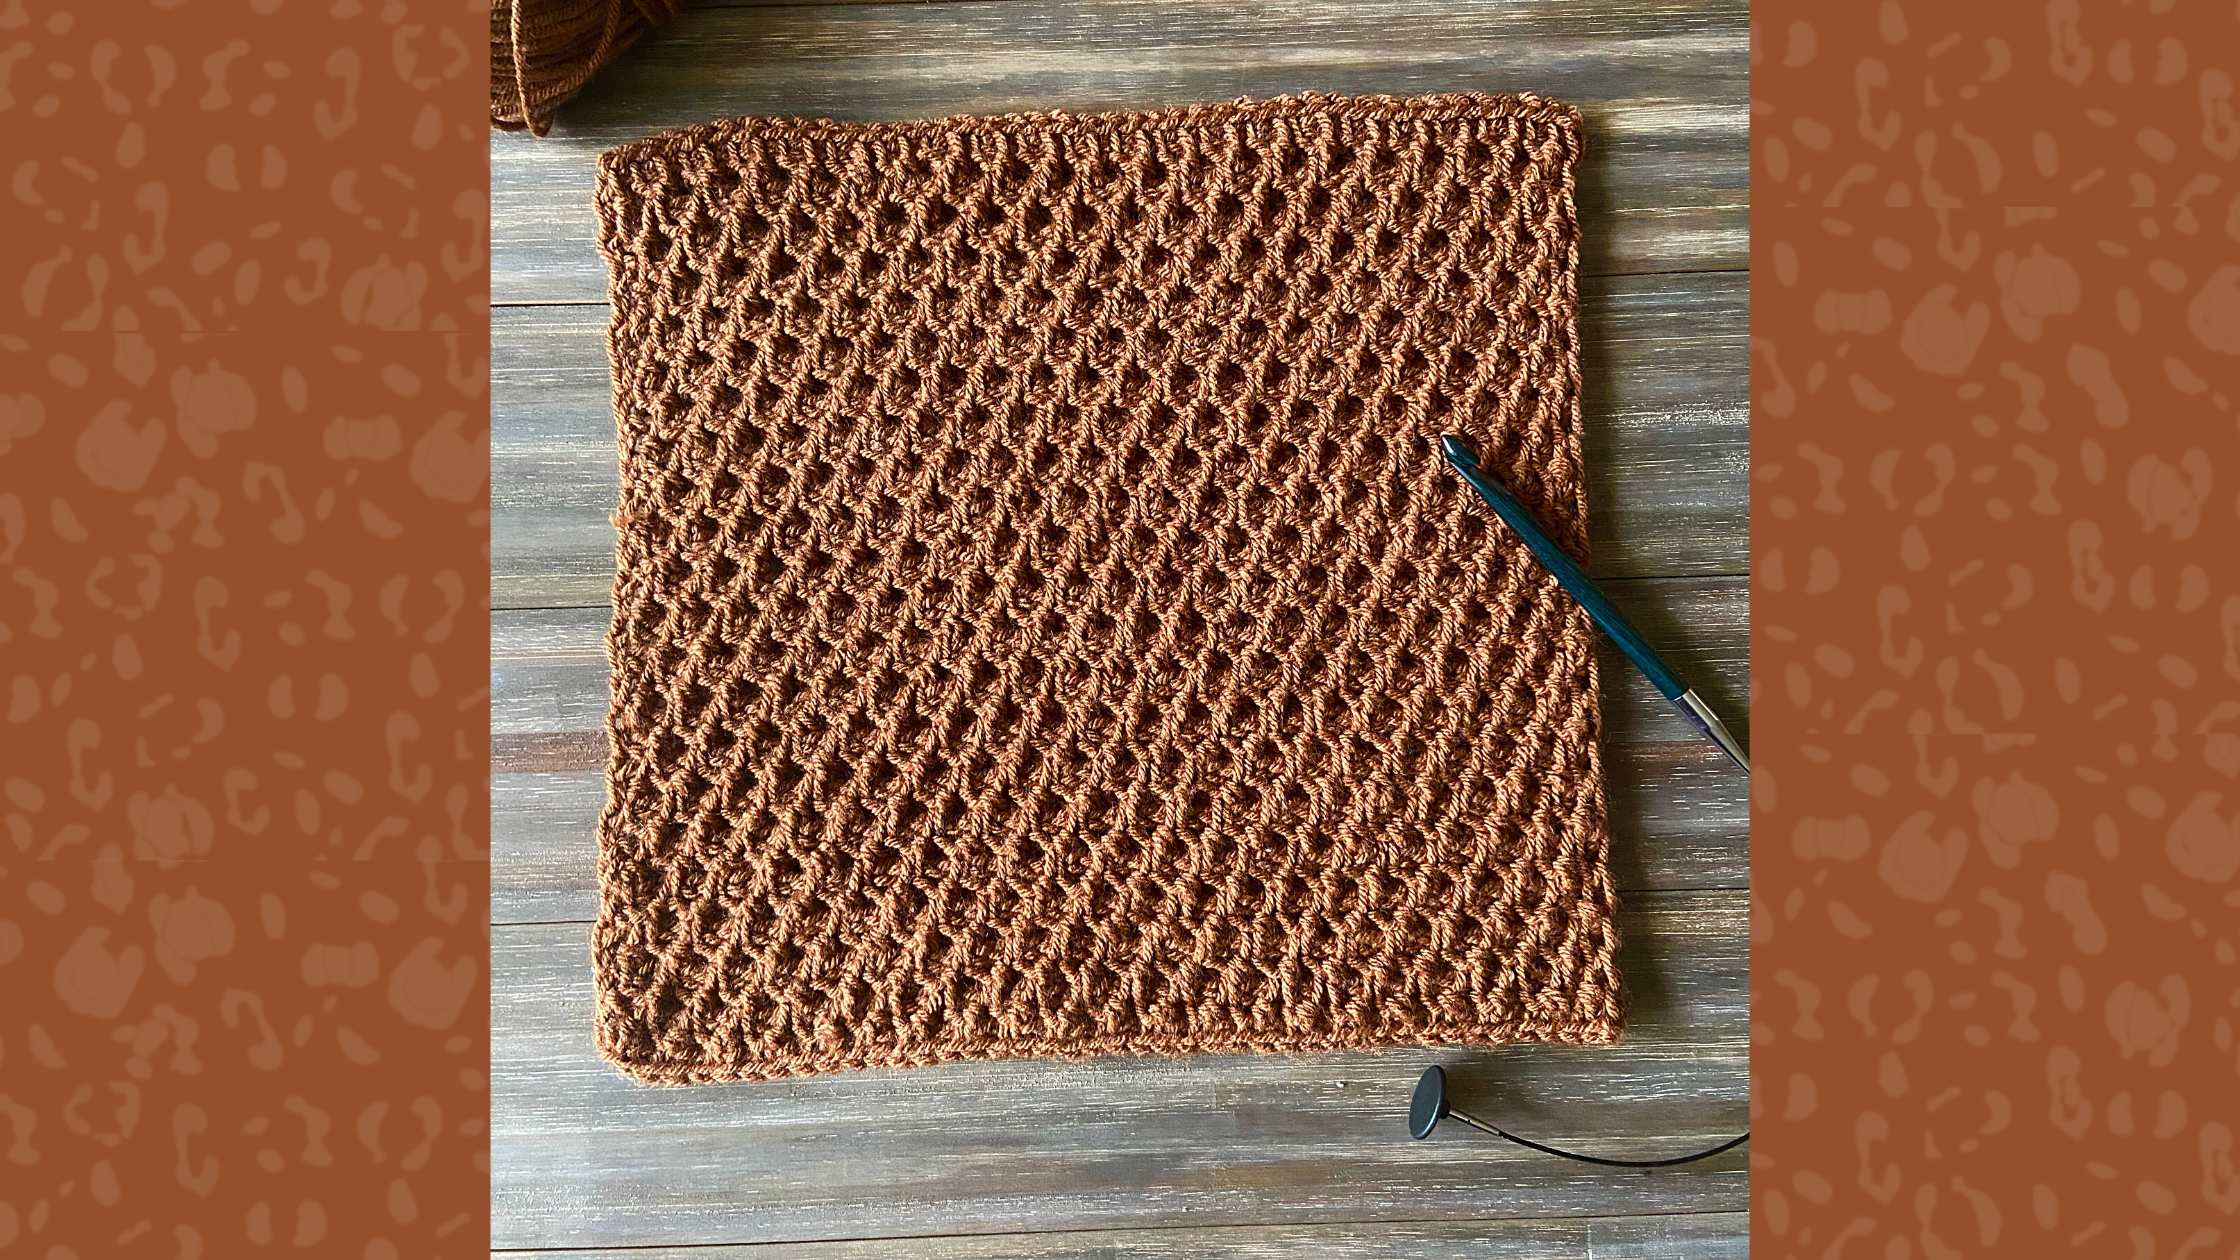 brown tunisian crochet blanket square on wood background with crochet hook on top